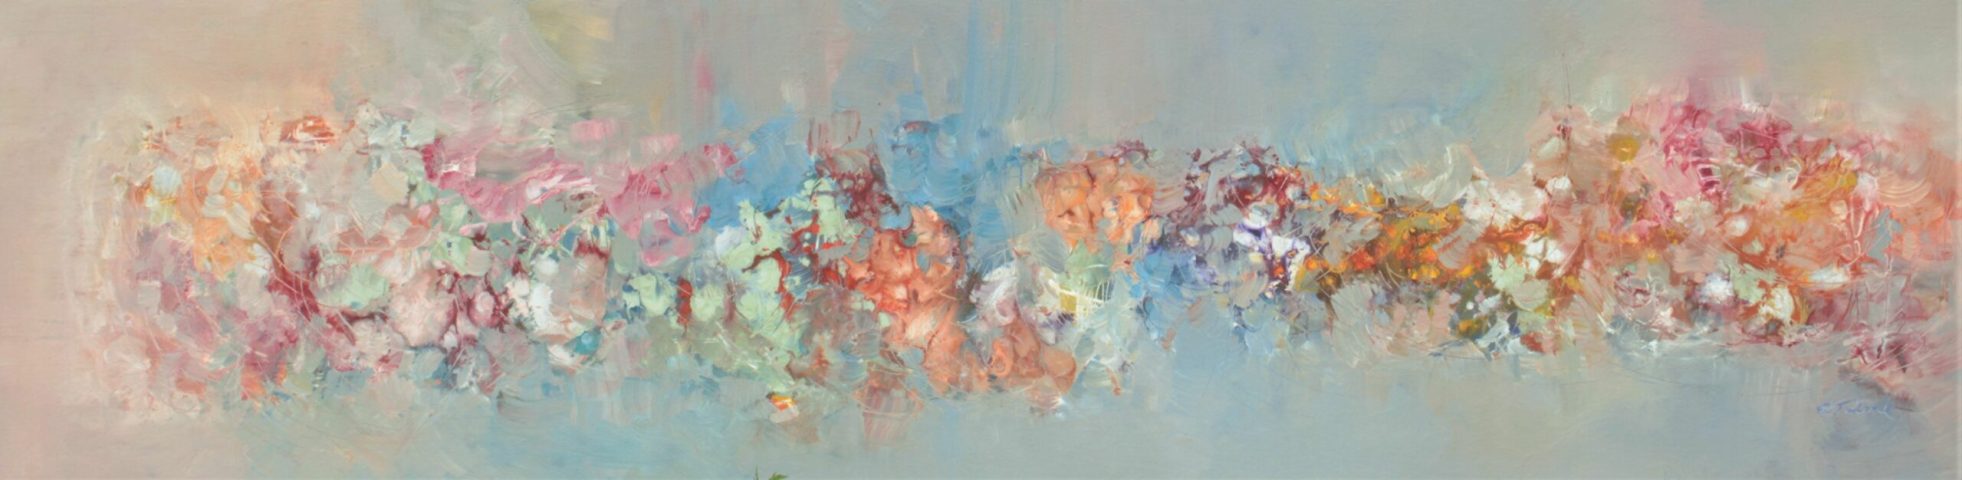 'R. Schumann Spring Symphony' by Ernestine Tahedl at Gallery 133